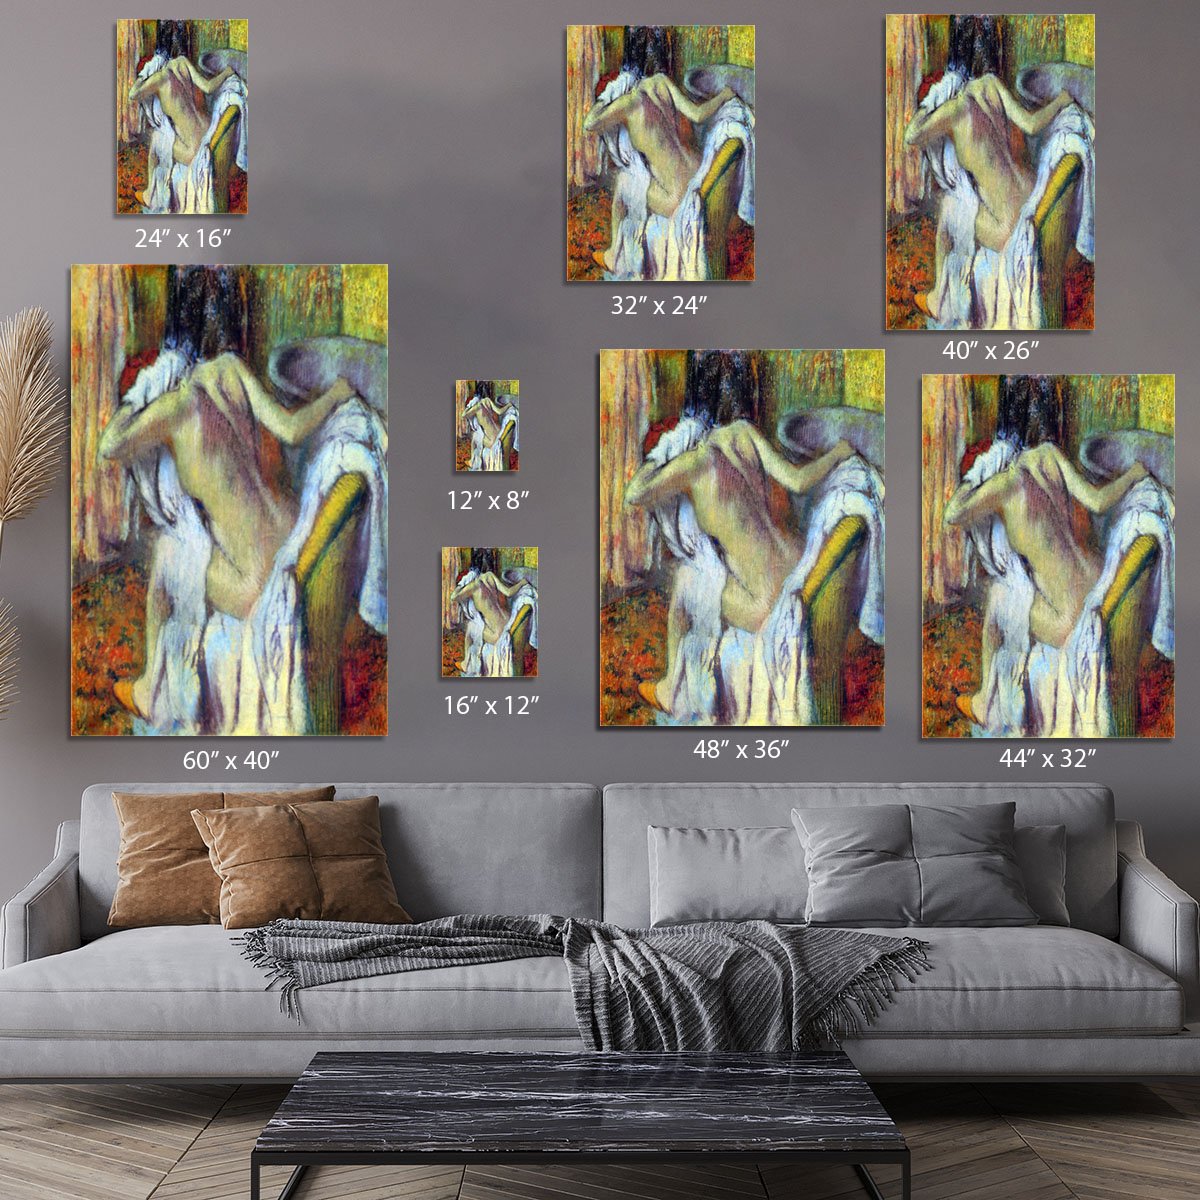 After Bathing 4 by Degas Canvas Print or Poster